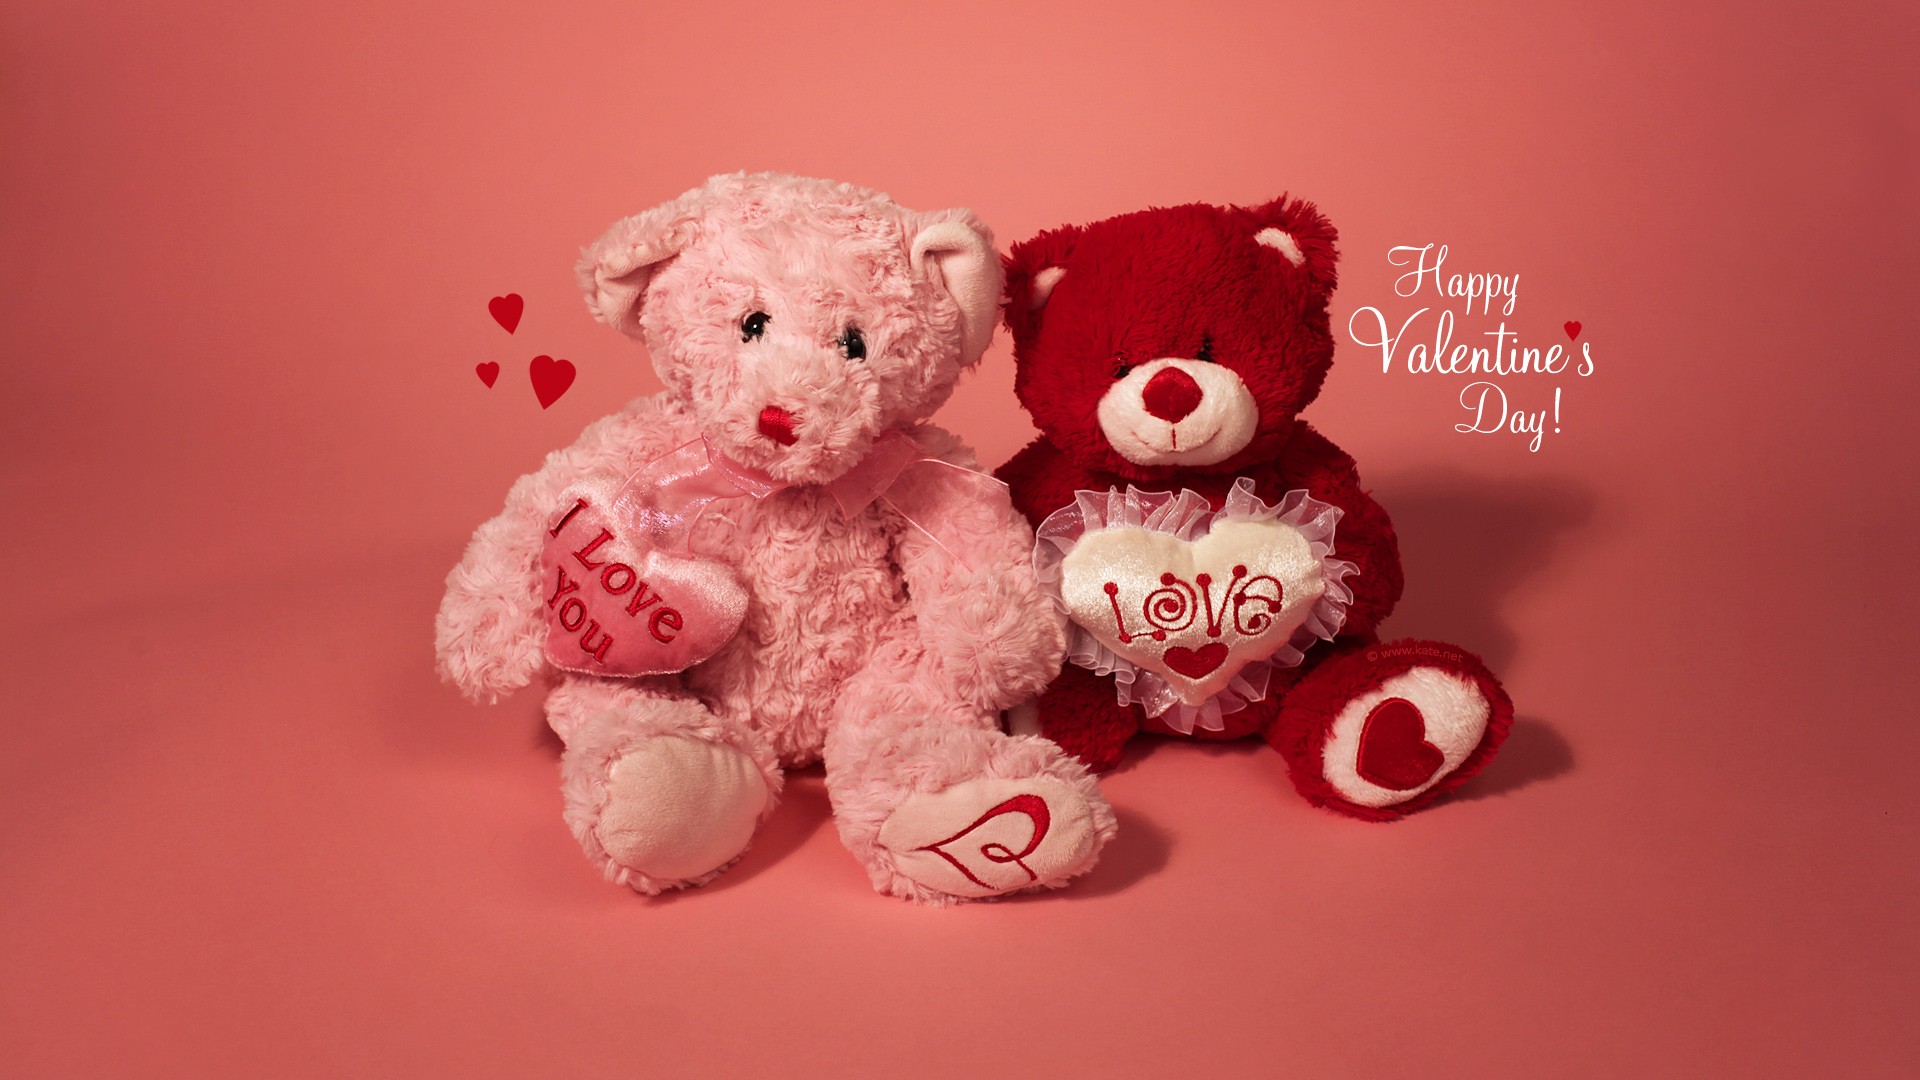 Happy Valentines Day Cute Pictures HD Wallpaper of Love